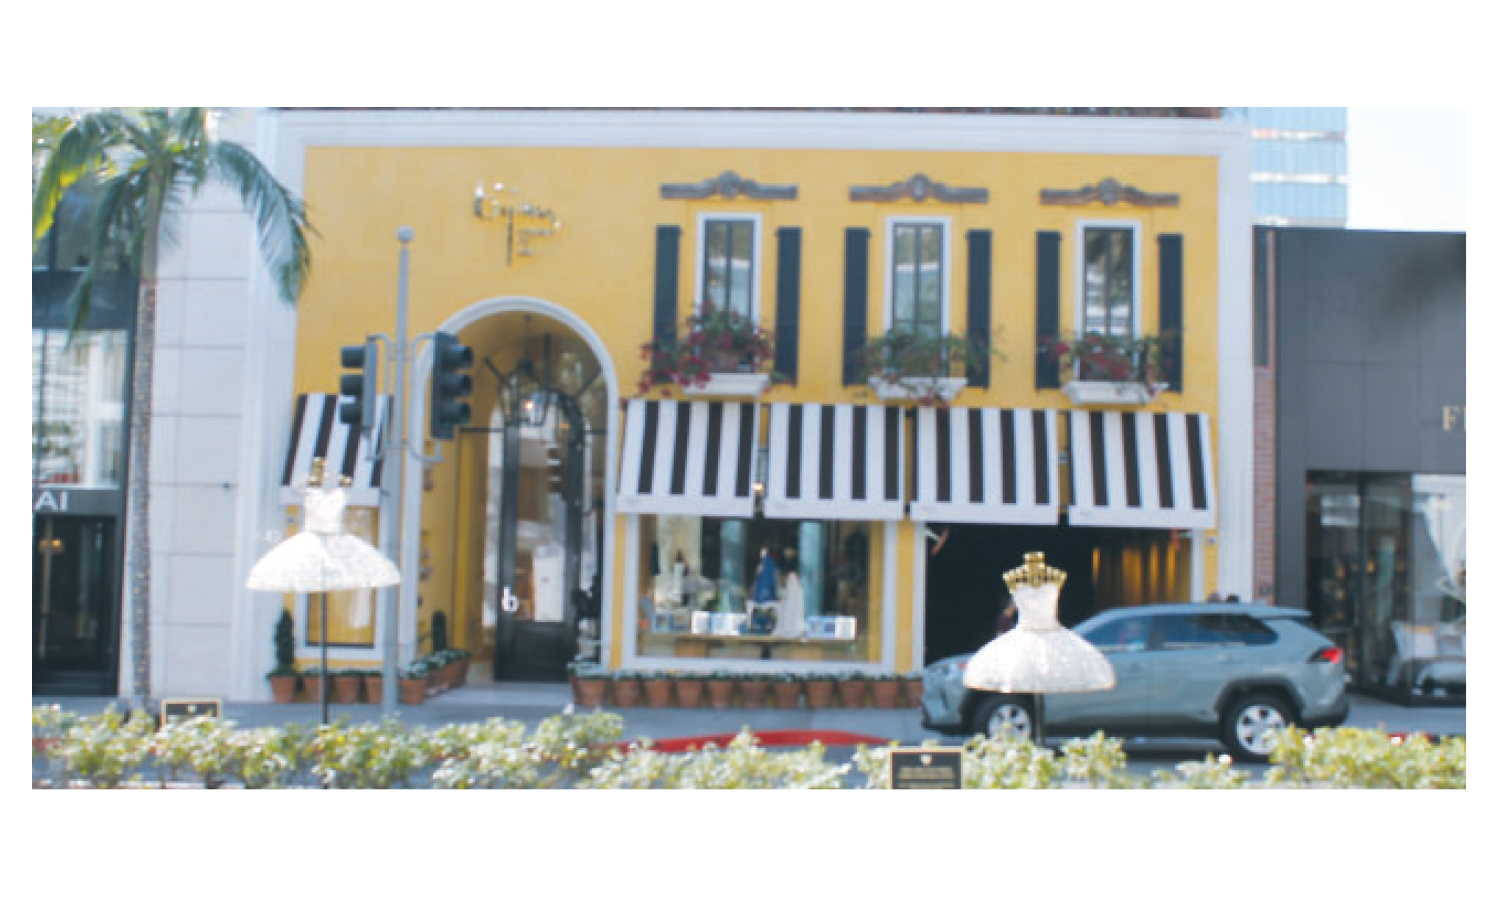 Luxury Car And Stores On Rodeo Drive Beverly Hills California